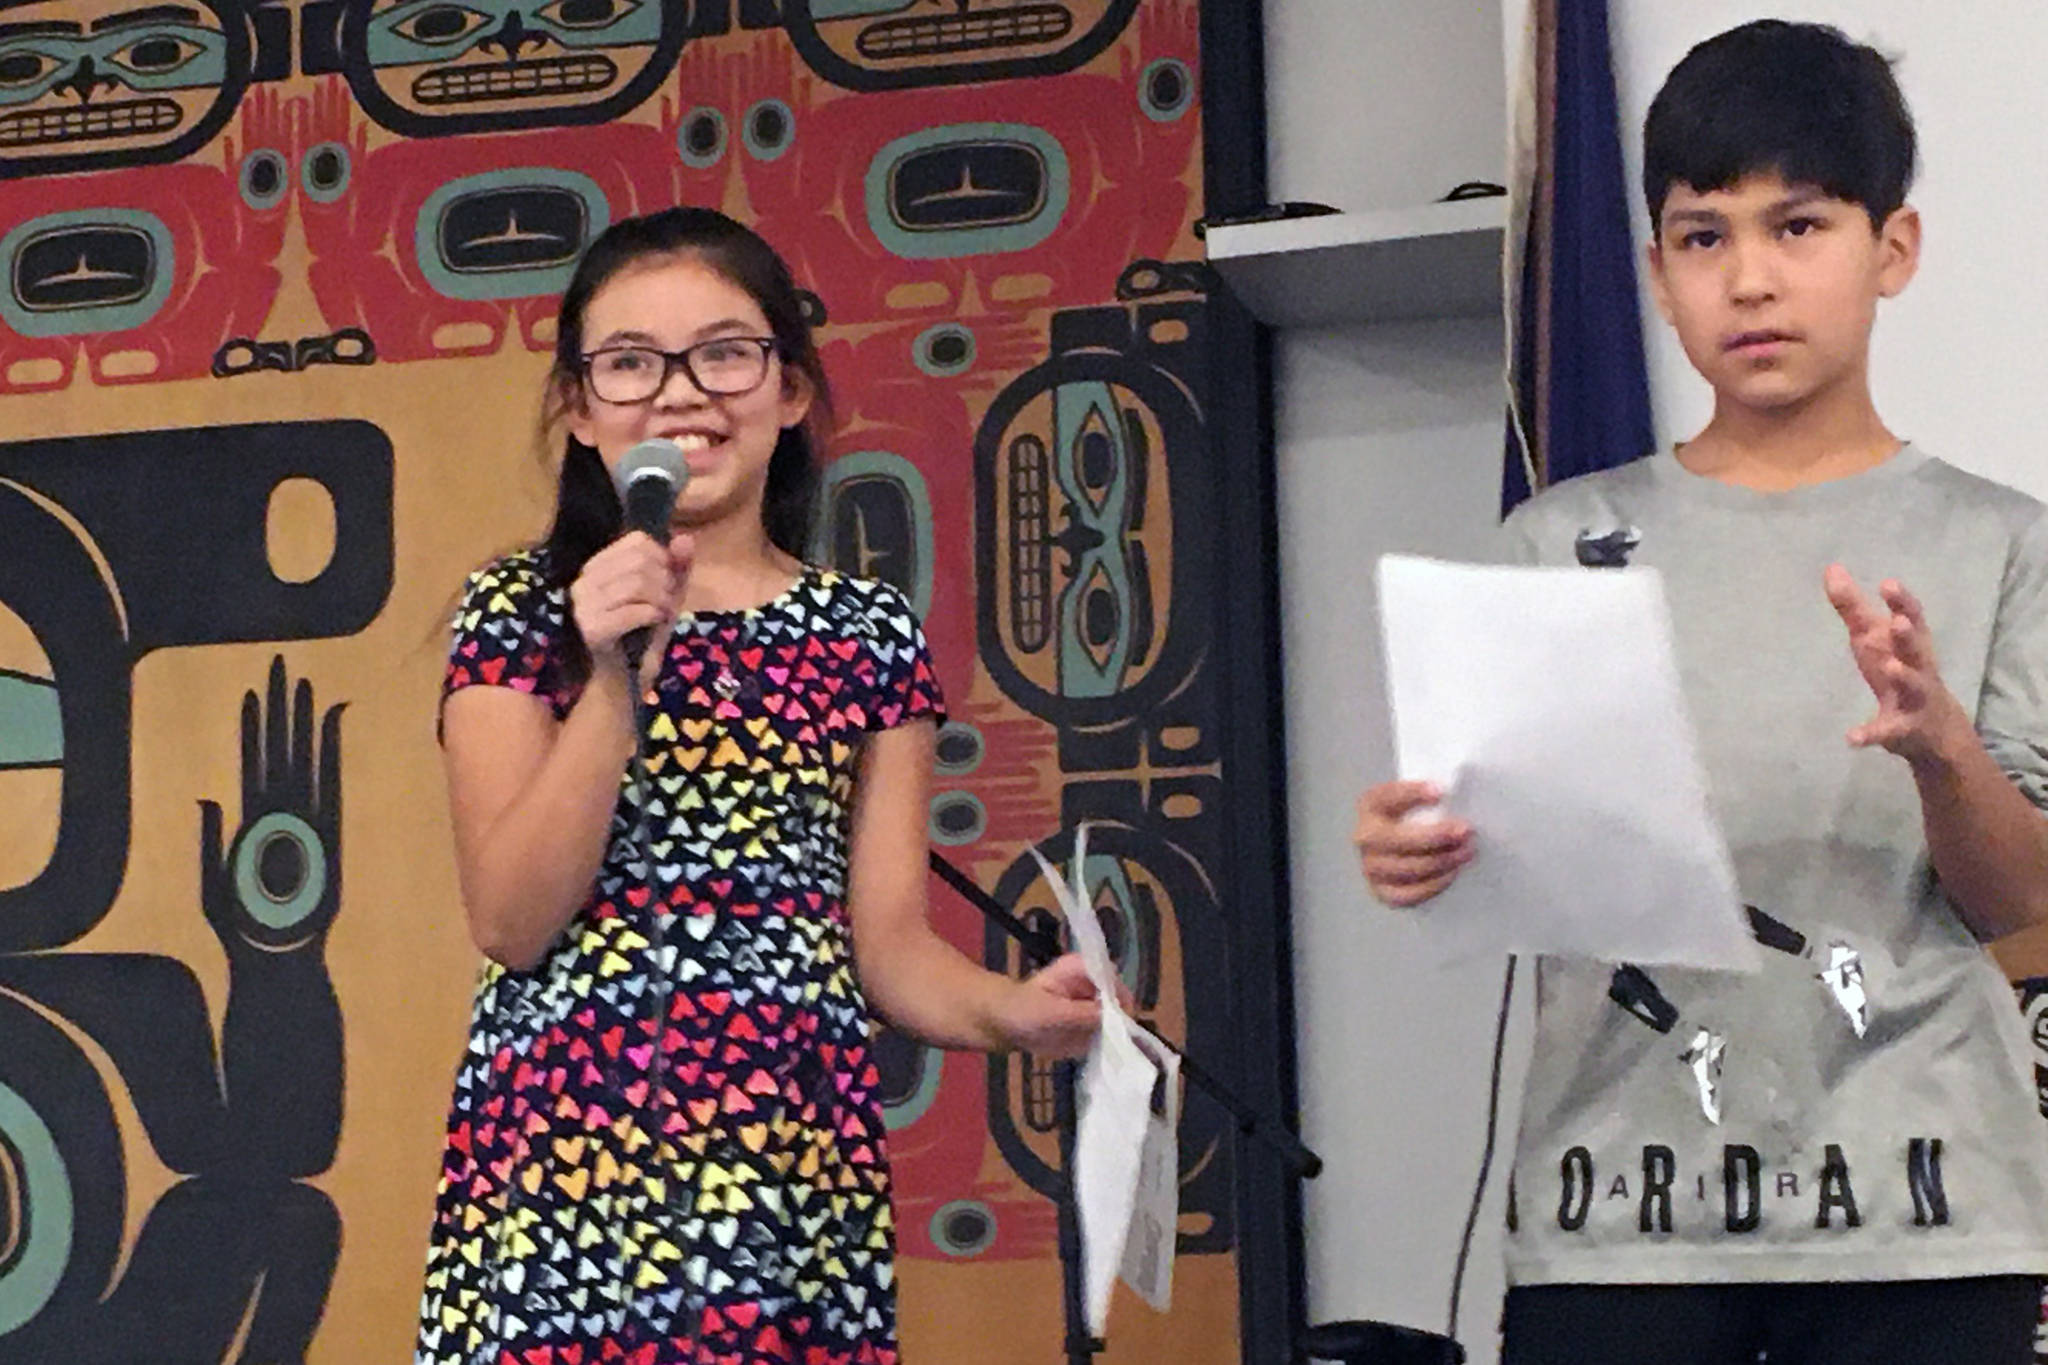 Glacier Valley Elementary School Sít’ Eetí Shaanáx students Faith Contreras and Johnny Hunter, who are both Tlingit, present at the Central Council of Tlingit and Haida Indian Tribes of Alaska elder’s luncheon. They collected 64 signatures at the luncheon in support of officially adding a second verse to the state song, “Alaska’s Flag.” Students say the new verse is culturally inclusive. (Courtesy Photo | Lorrie Heagy)